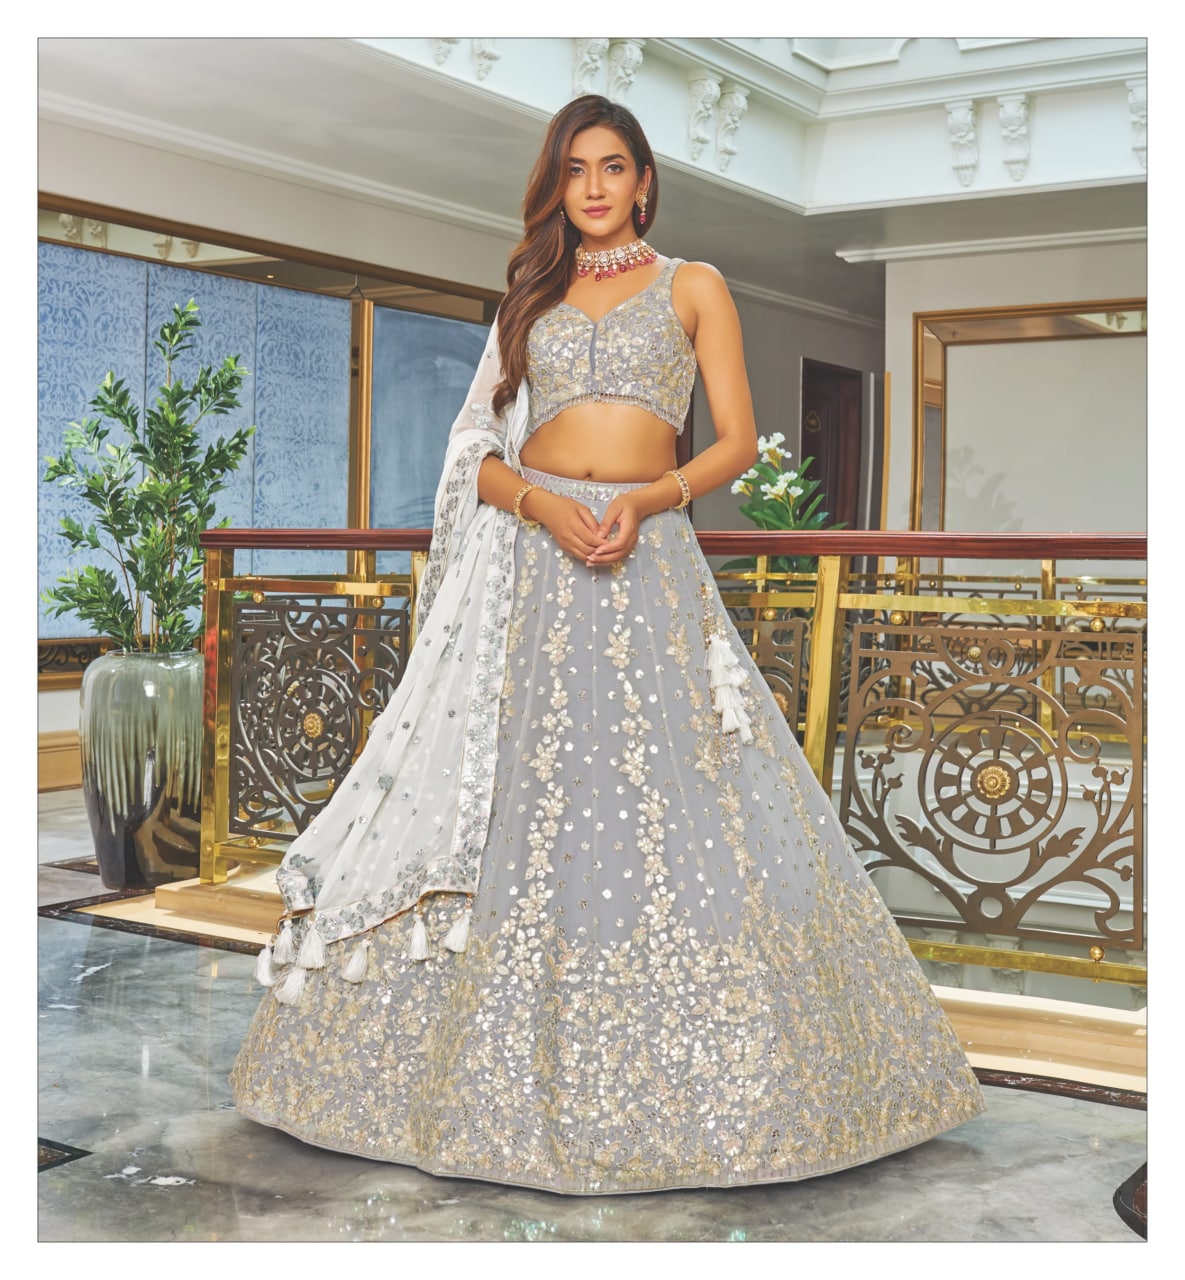 STONE GREY LEHENGA WITH A CONTRAST ASH GREY HANDWORK BLOUSE AND BELT PAIRED  WITH A GREY DUPATTA AND SILVER TASSELS. - Seasons India